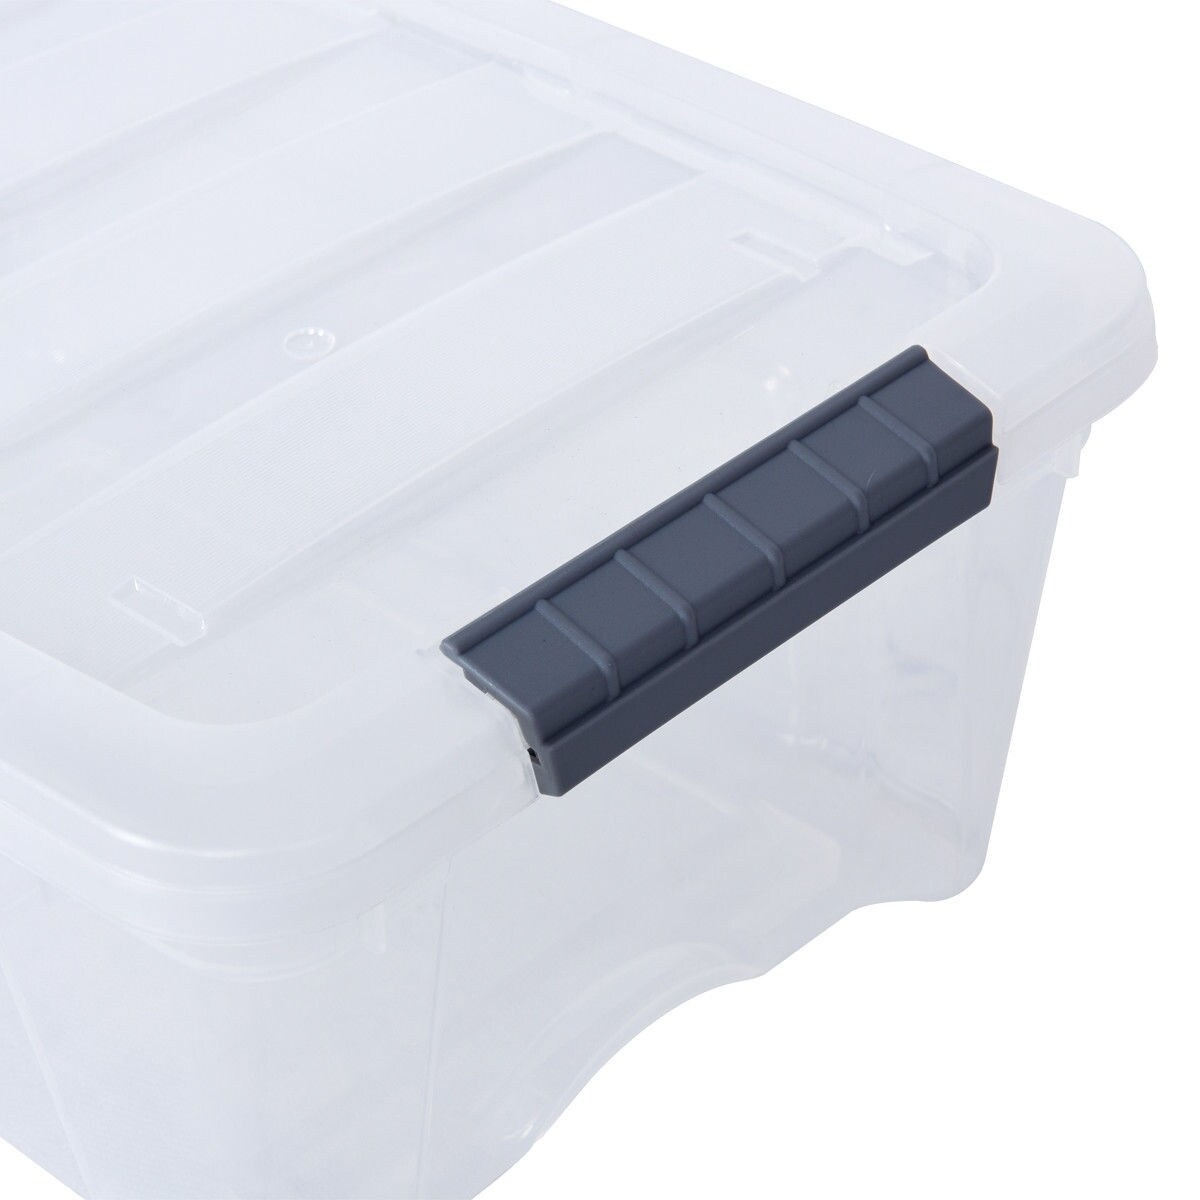 https://ak1.ostkcdn.com/images/products/is/images/direct/02039964380bc0d39293f8b15b63492a1996e1f0/Sturdy-Plastic-Latch-Stack-Storage-Tubs-Box.jpg